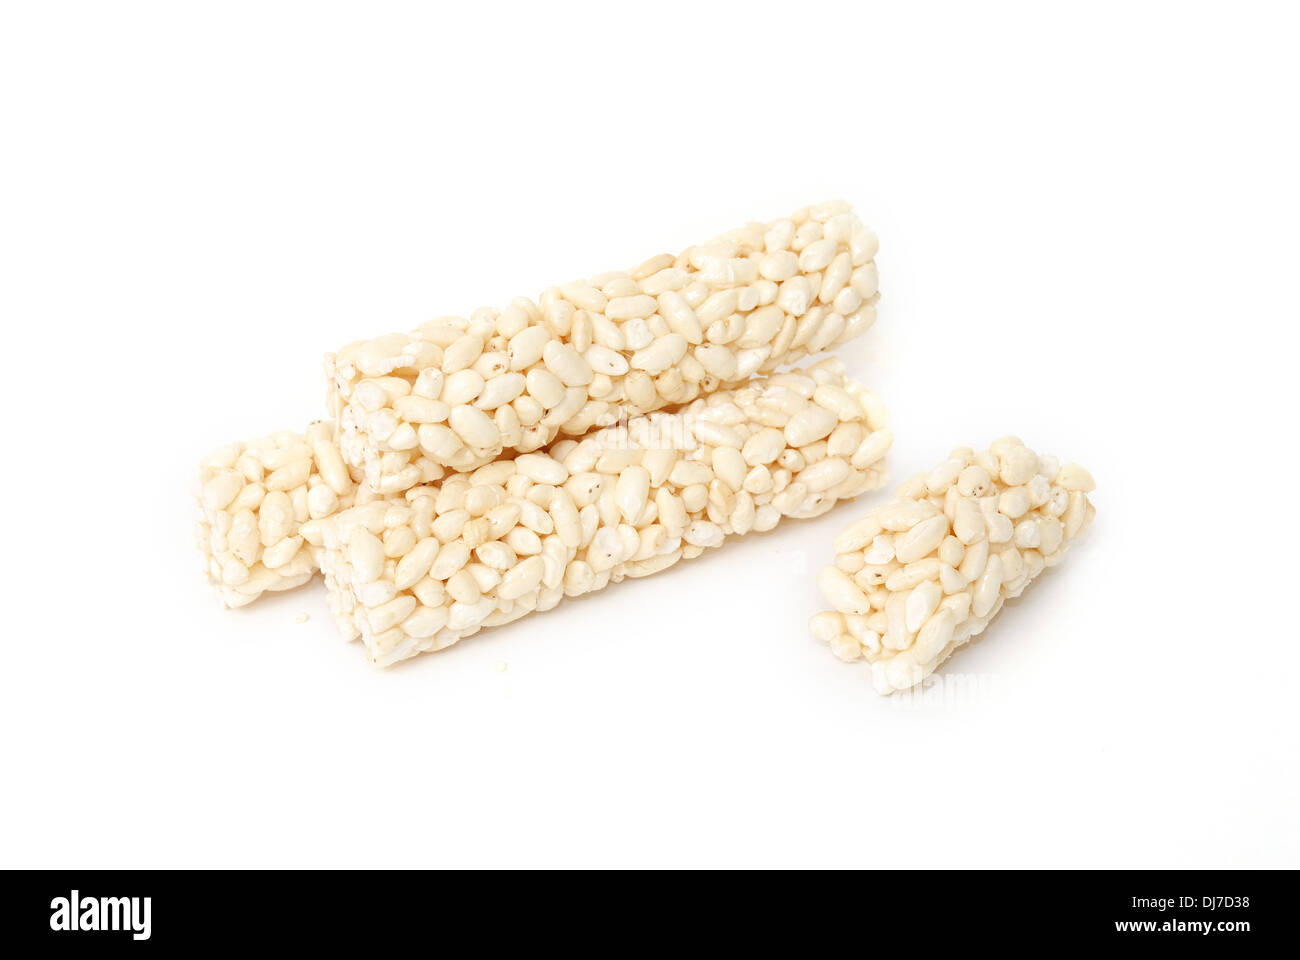 a puffed rice snack bar, isolated on white Stock Photo